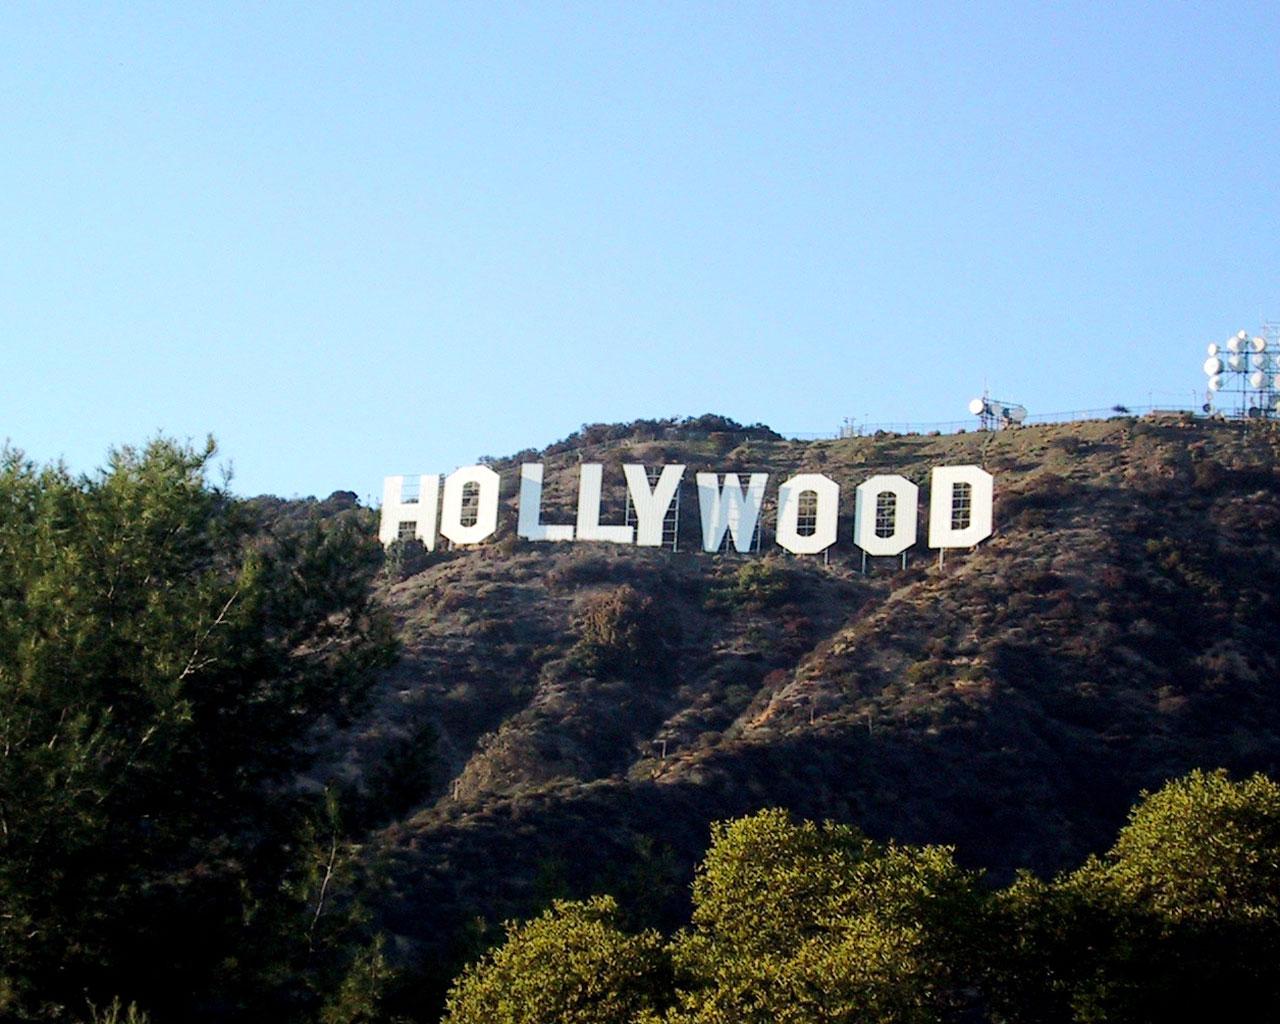 Los Angeles - Hollywood sign Wallpaper #2 1280 x 1024 